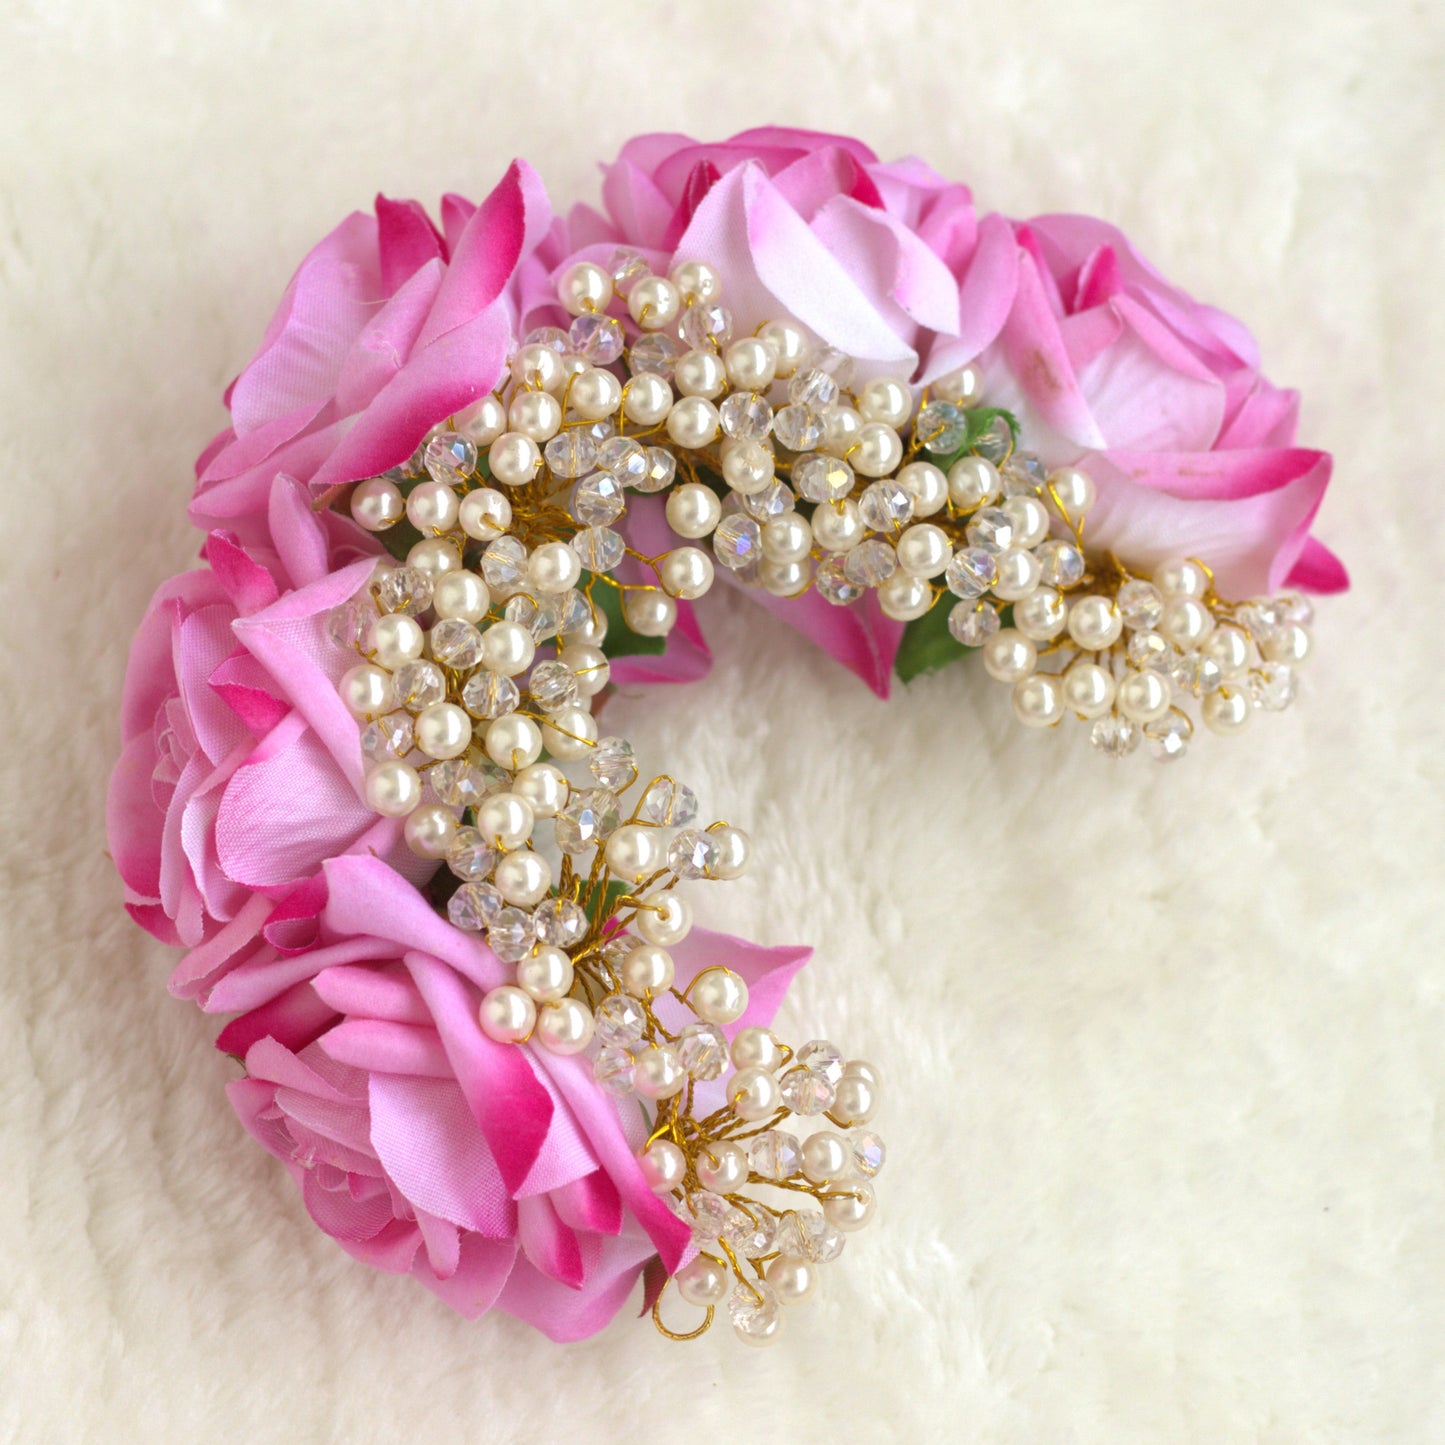 Flexible Real Look Roses with Pearls & Crystals Artificial Hair Bun Flower Accessory